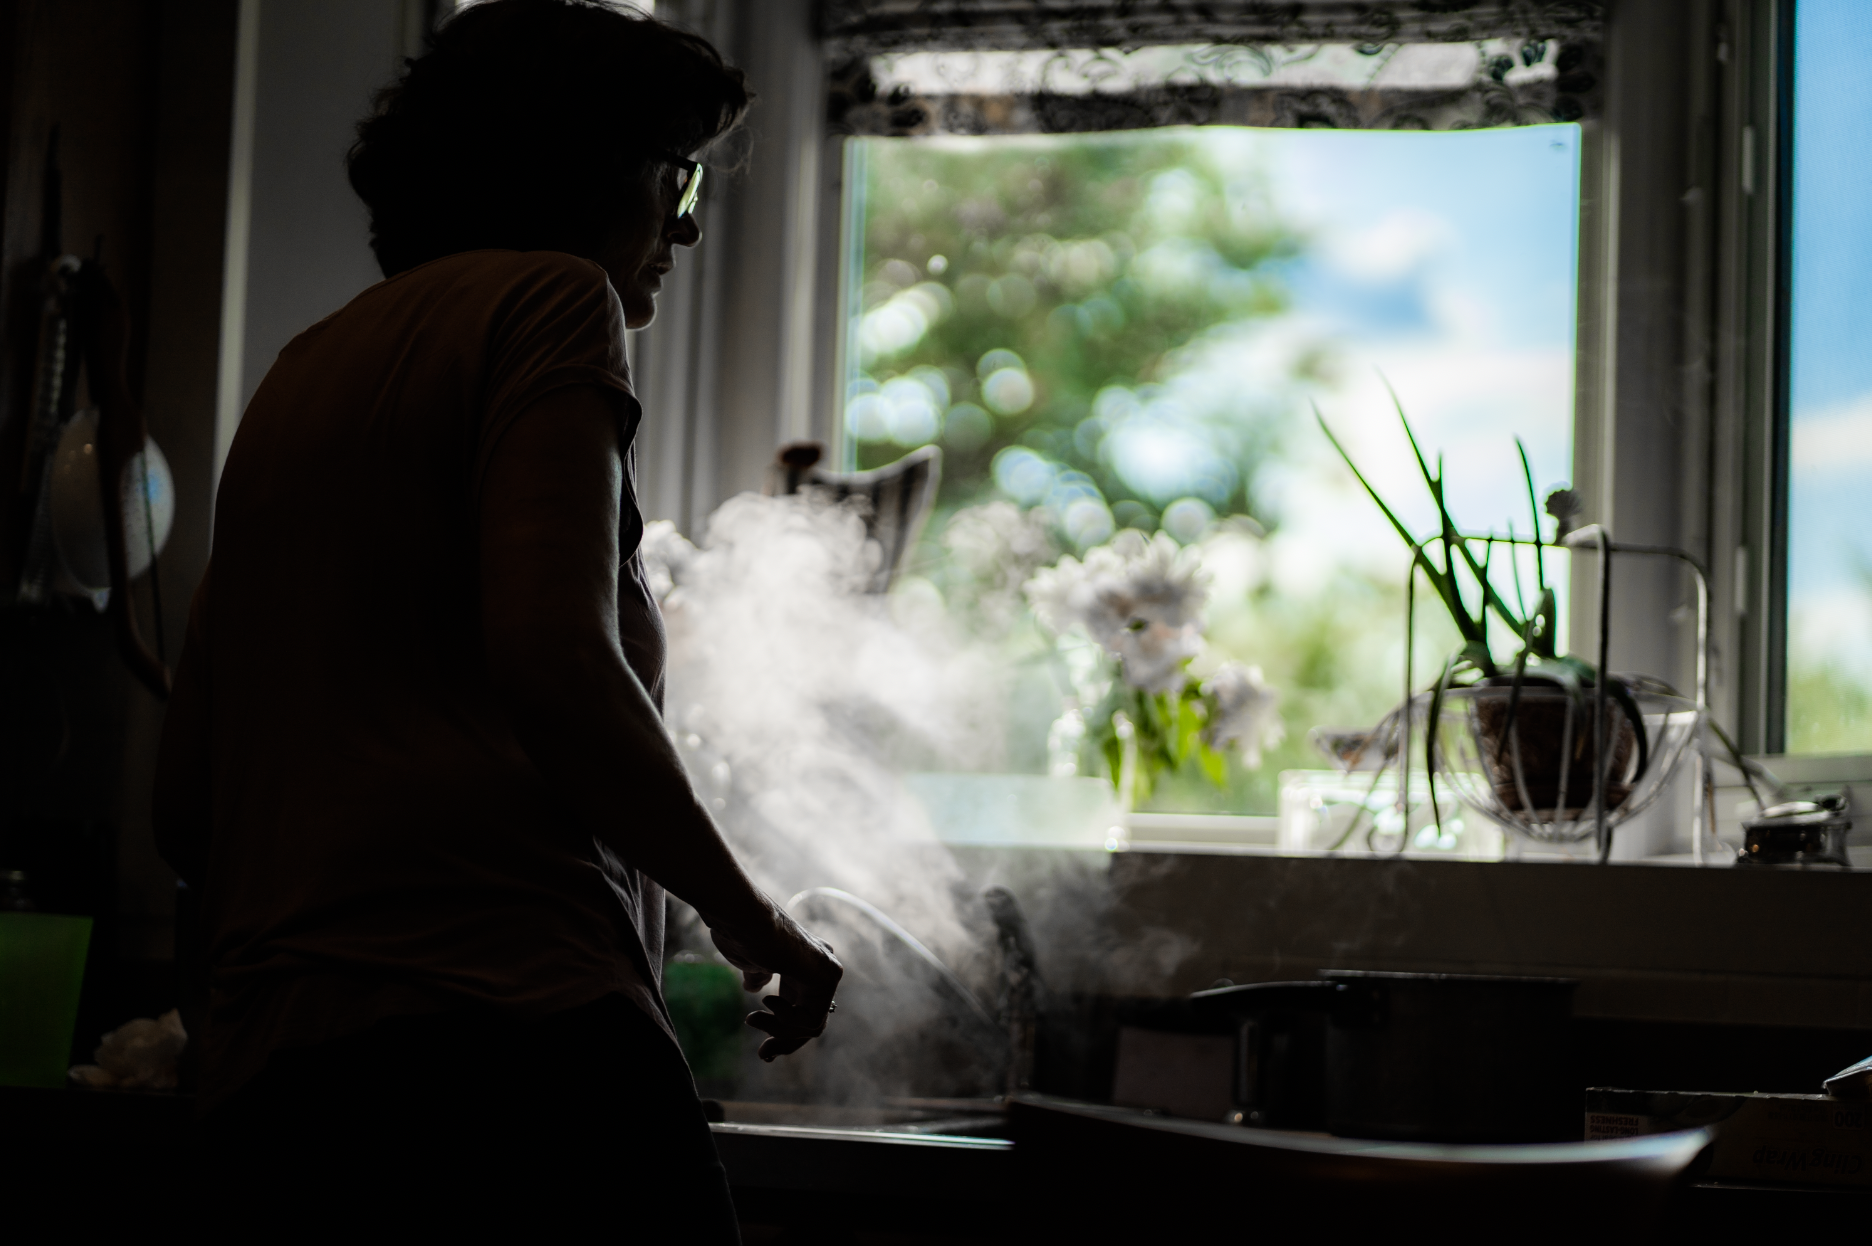 Silhouette of a hurried woman looking away from a kitchen sink that is steaming from cooked pasta draining, afternoon light flooding in from a window behind